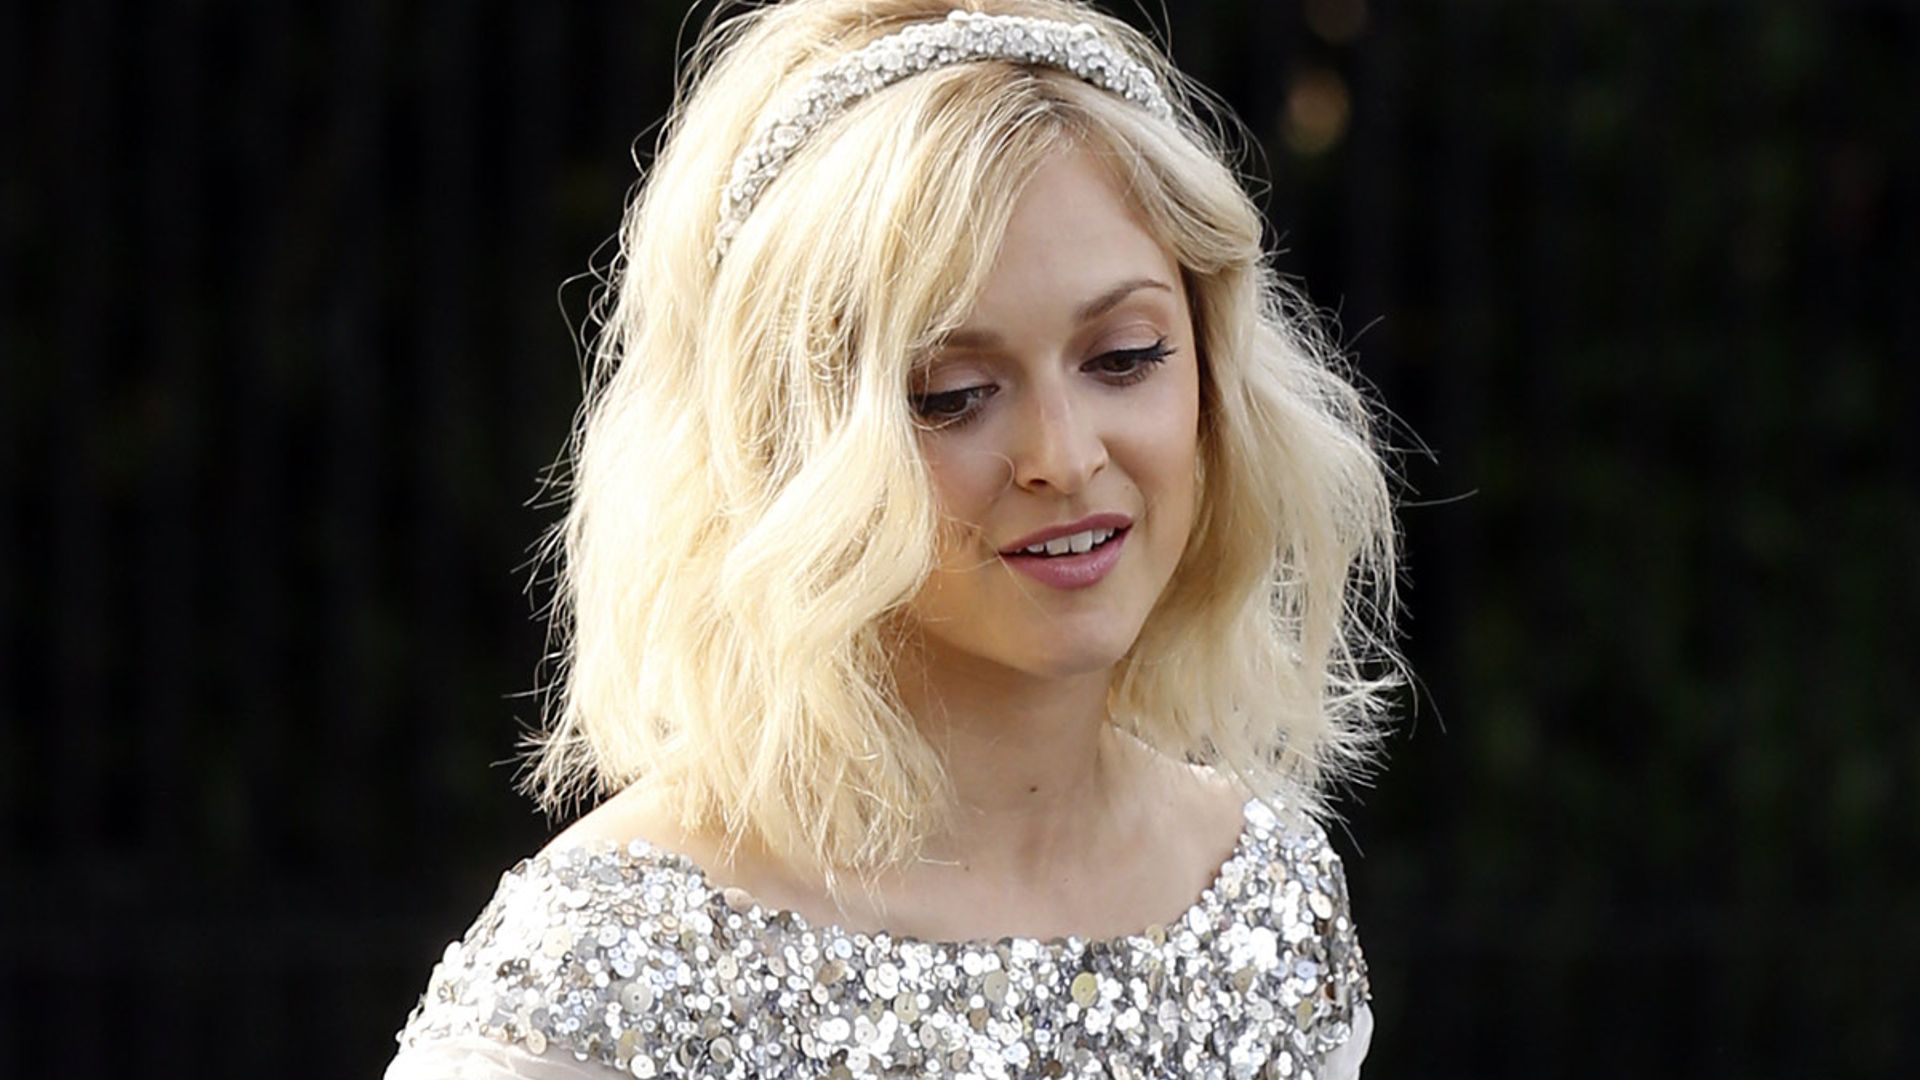 Fearne Cotton’s sparkly wedding dress featured 'something borrowed' from surprising A-lister